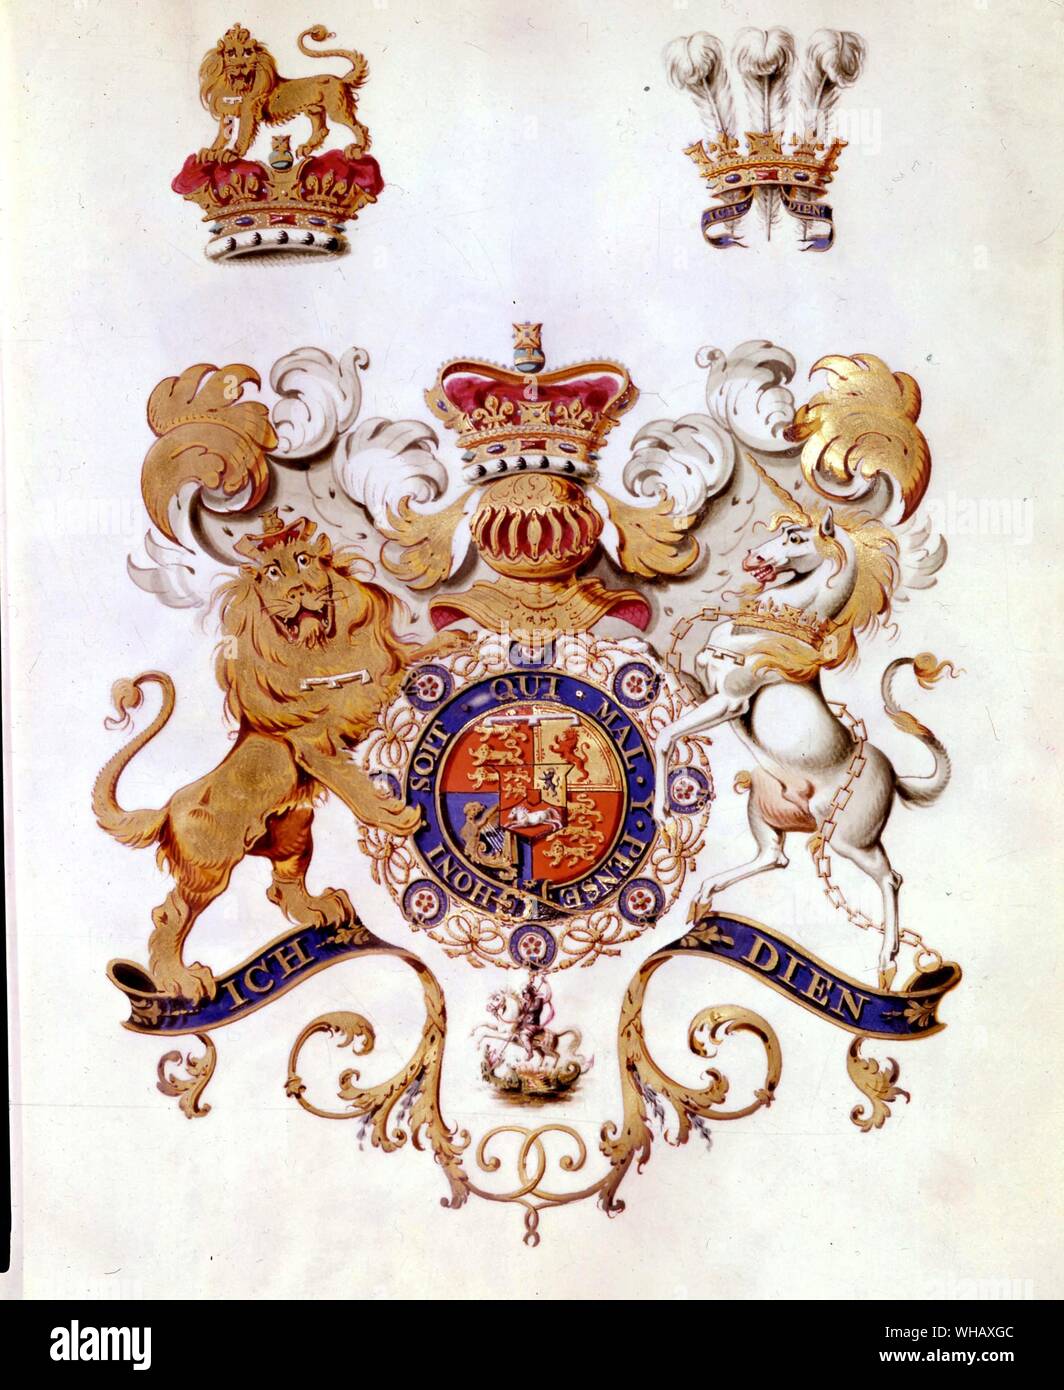 The Regent's Coat of Arms, from Sovereigns of the Bath, 1803. Stock Photo